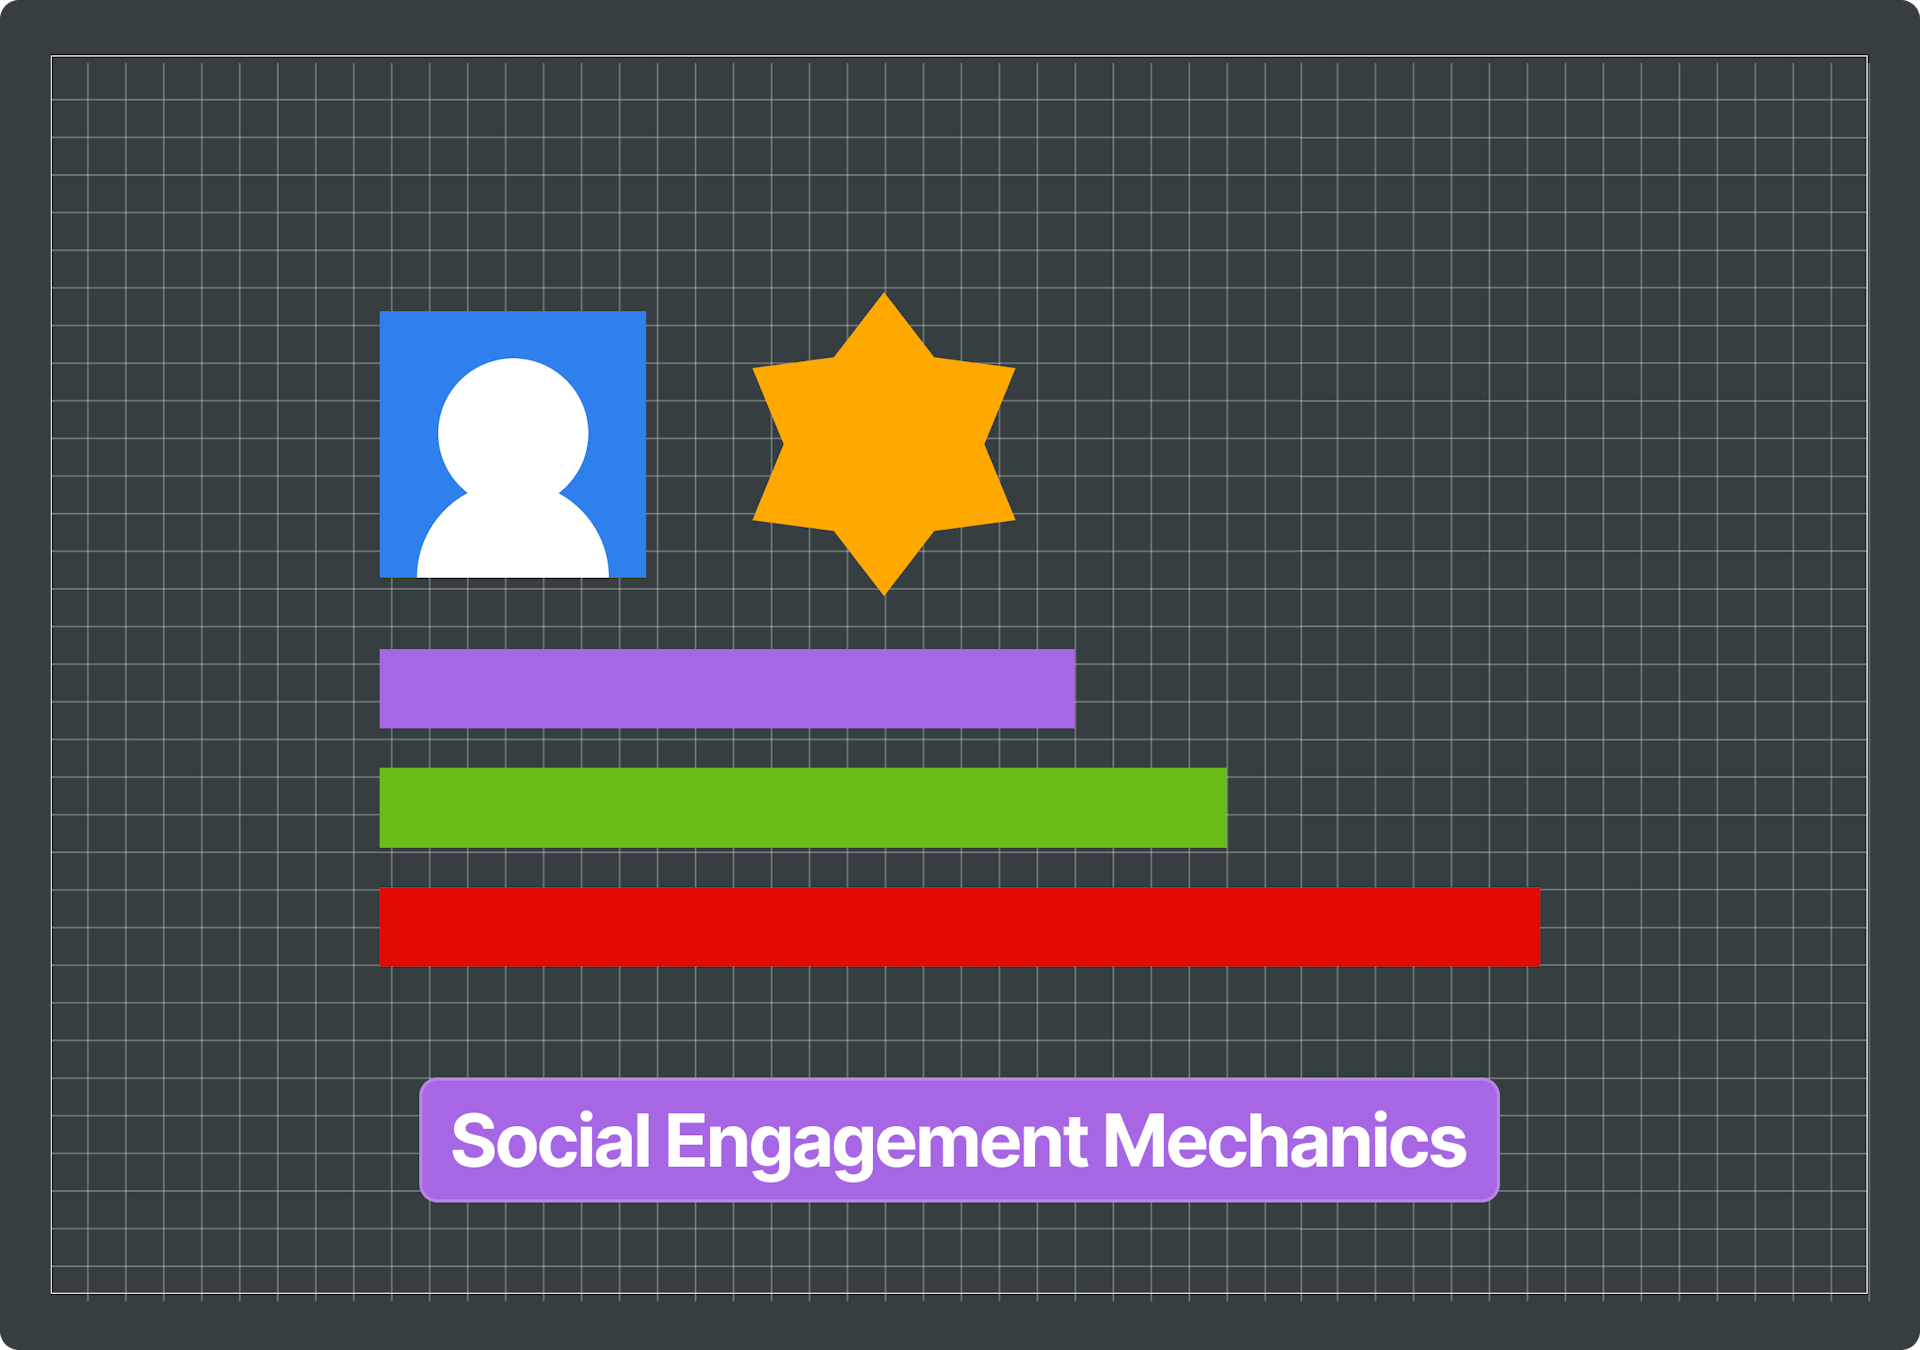 Illustration of a character, a yellow star and three horizontal lines of different length and colour. Includes text that says "Social Engagement Mechanics".